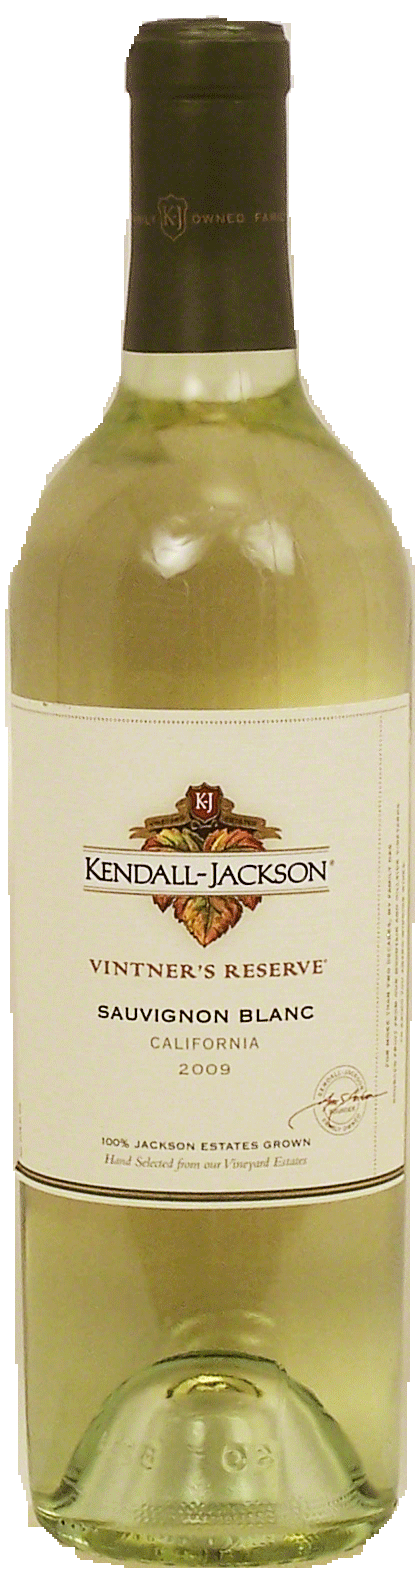 Kendall-jackson Vintner's Reserve sauvignon blanc wine of California, 13.5% alc. by vol. Full-Size Picture